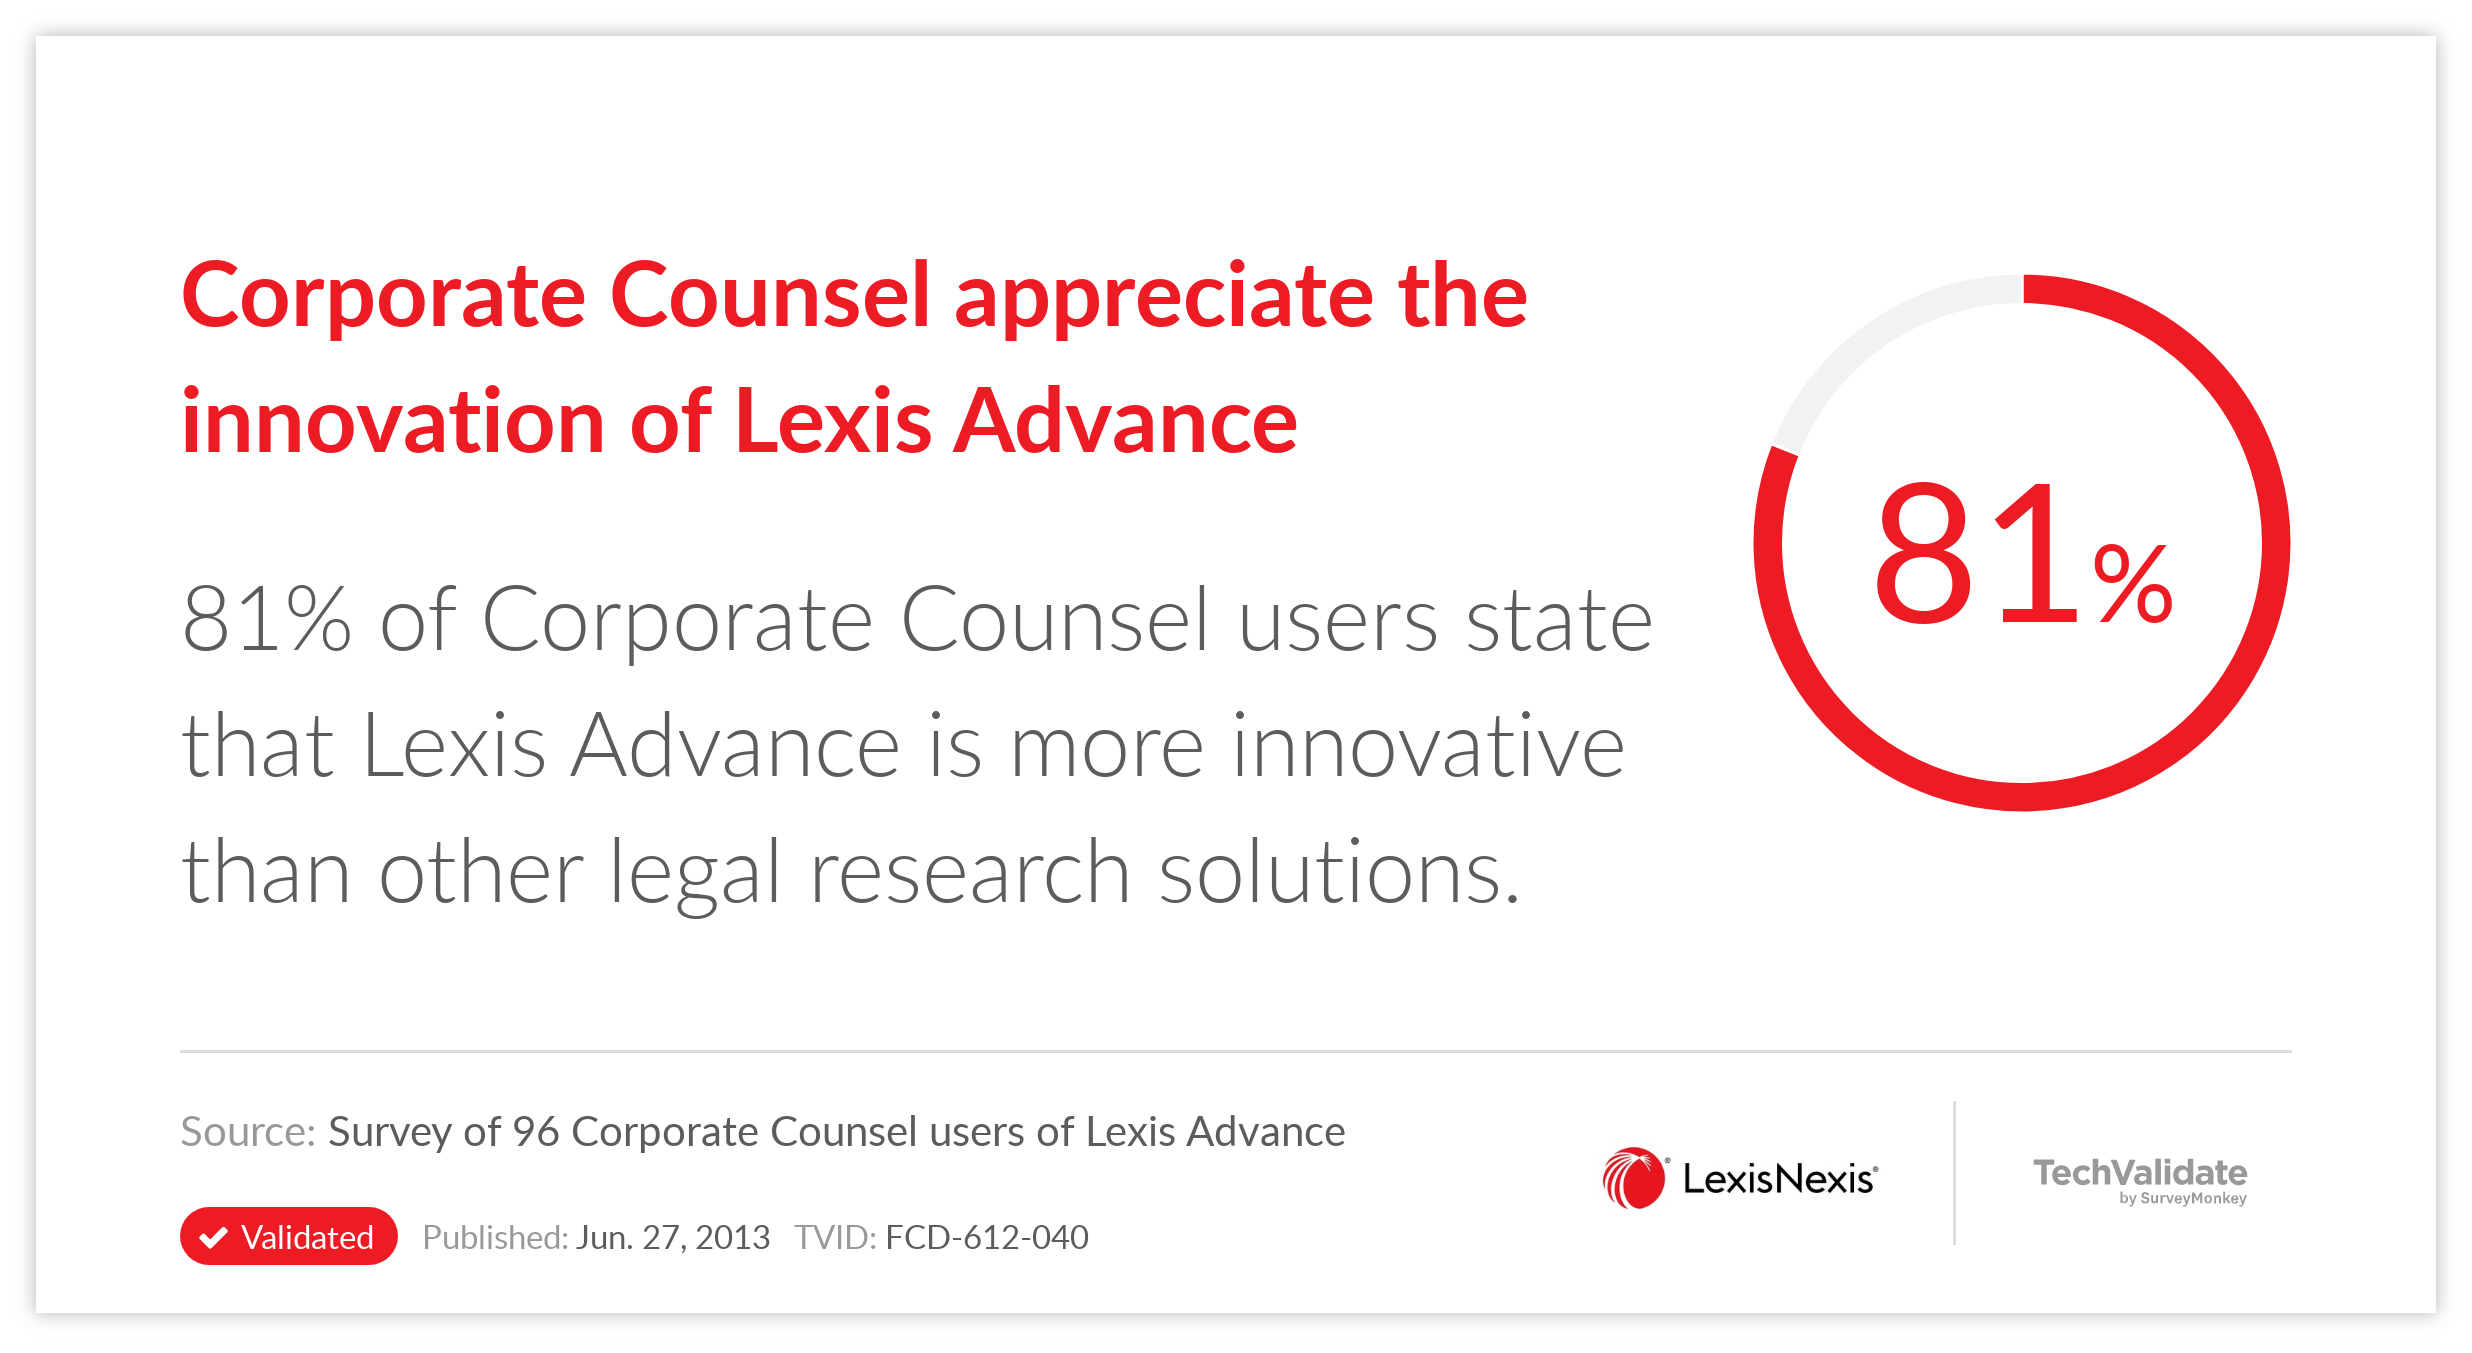 Corporate Counsel appreciate the innovation of Lexis Advance